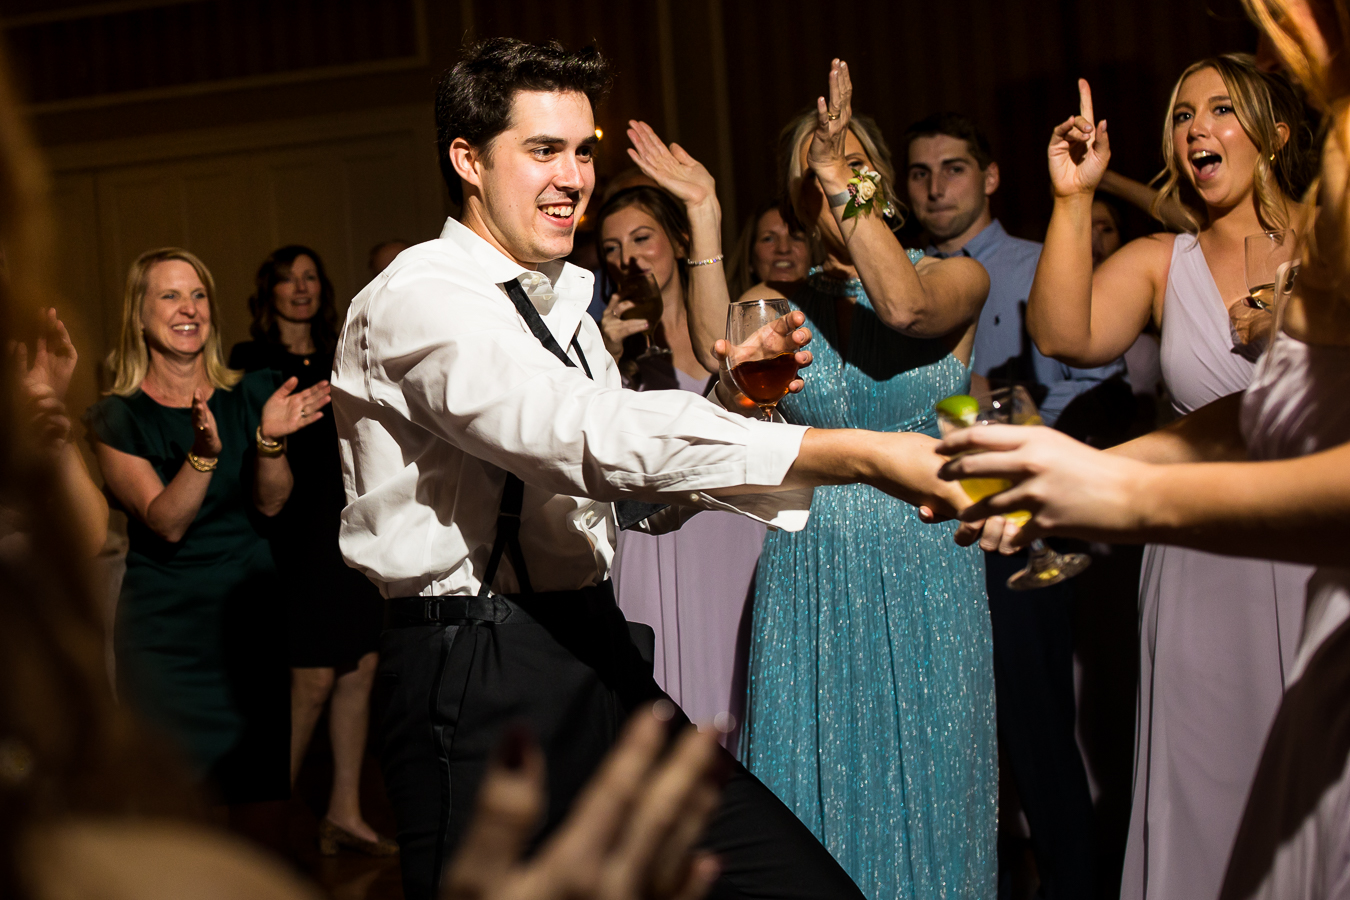 pa wedding photographer, lisa rhinehart, captures this fun dancing shots of guests having a good time at this country club of york wedding